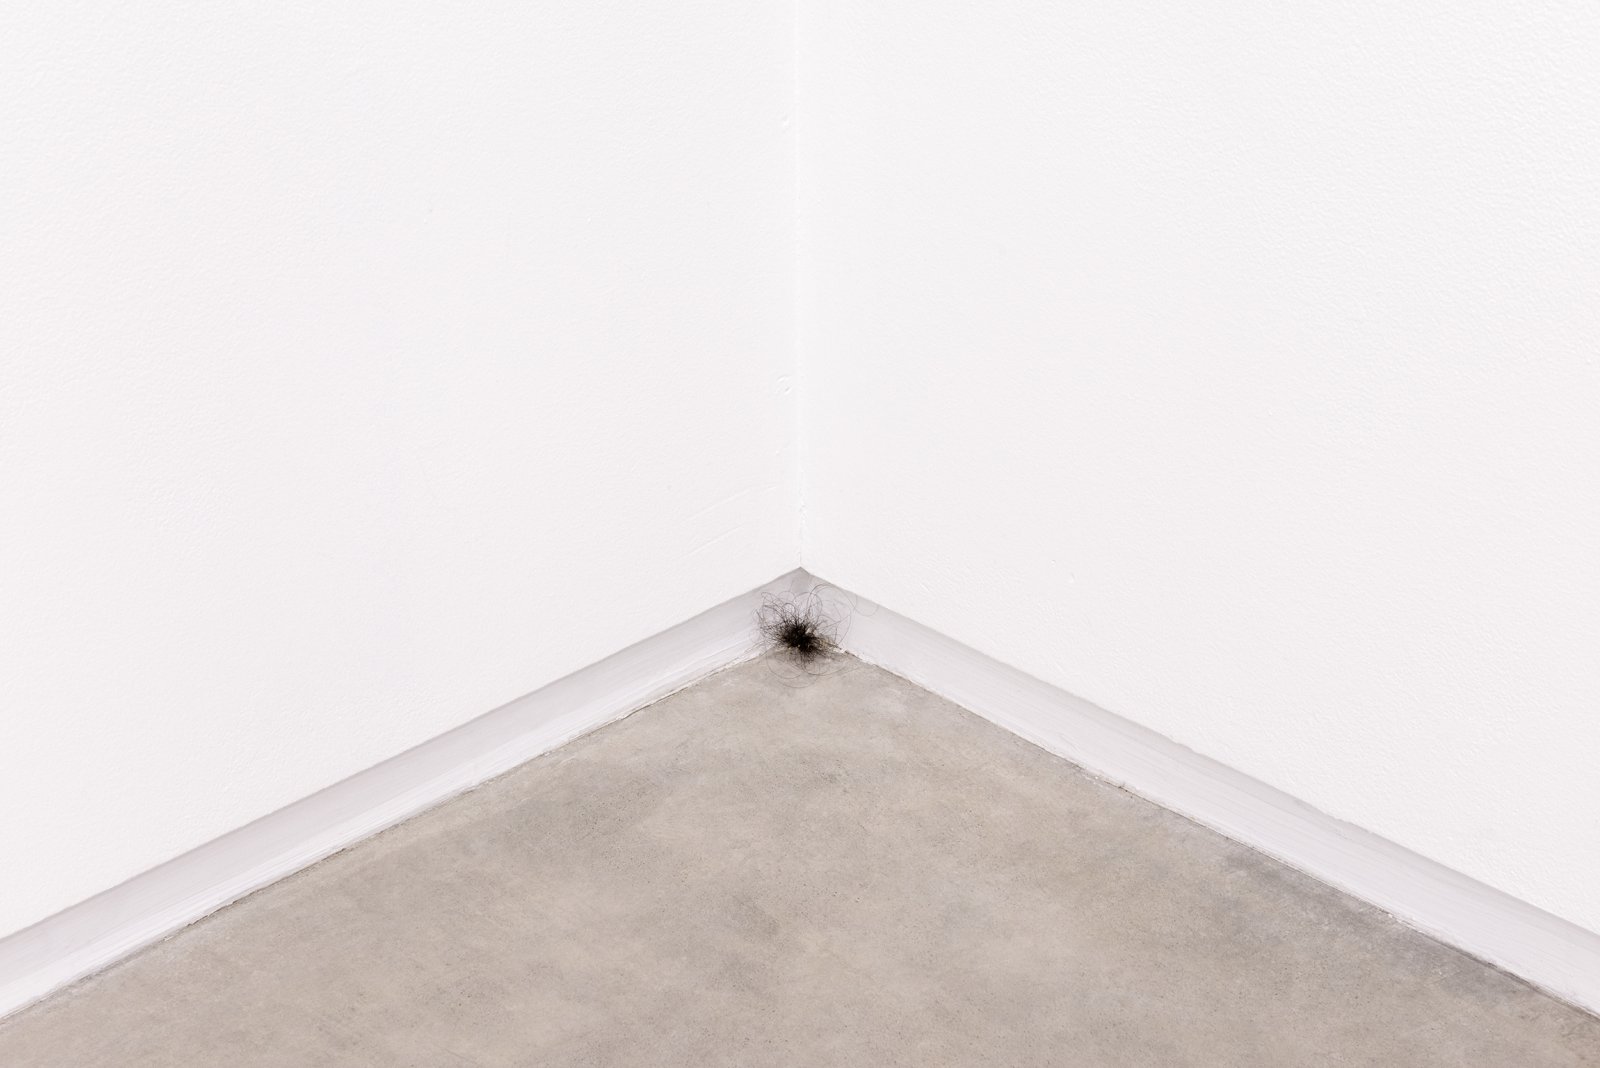 ​Duane Linklater, installation view, But the sun is up and you're going?, Catriona Jeffries, 2014​ by Duane Linklater